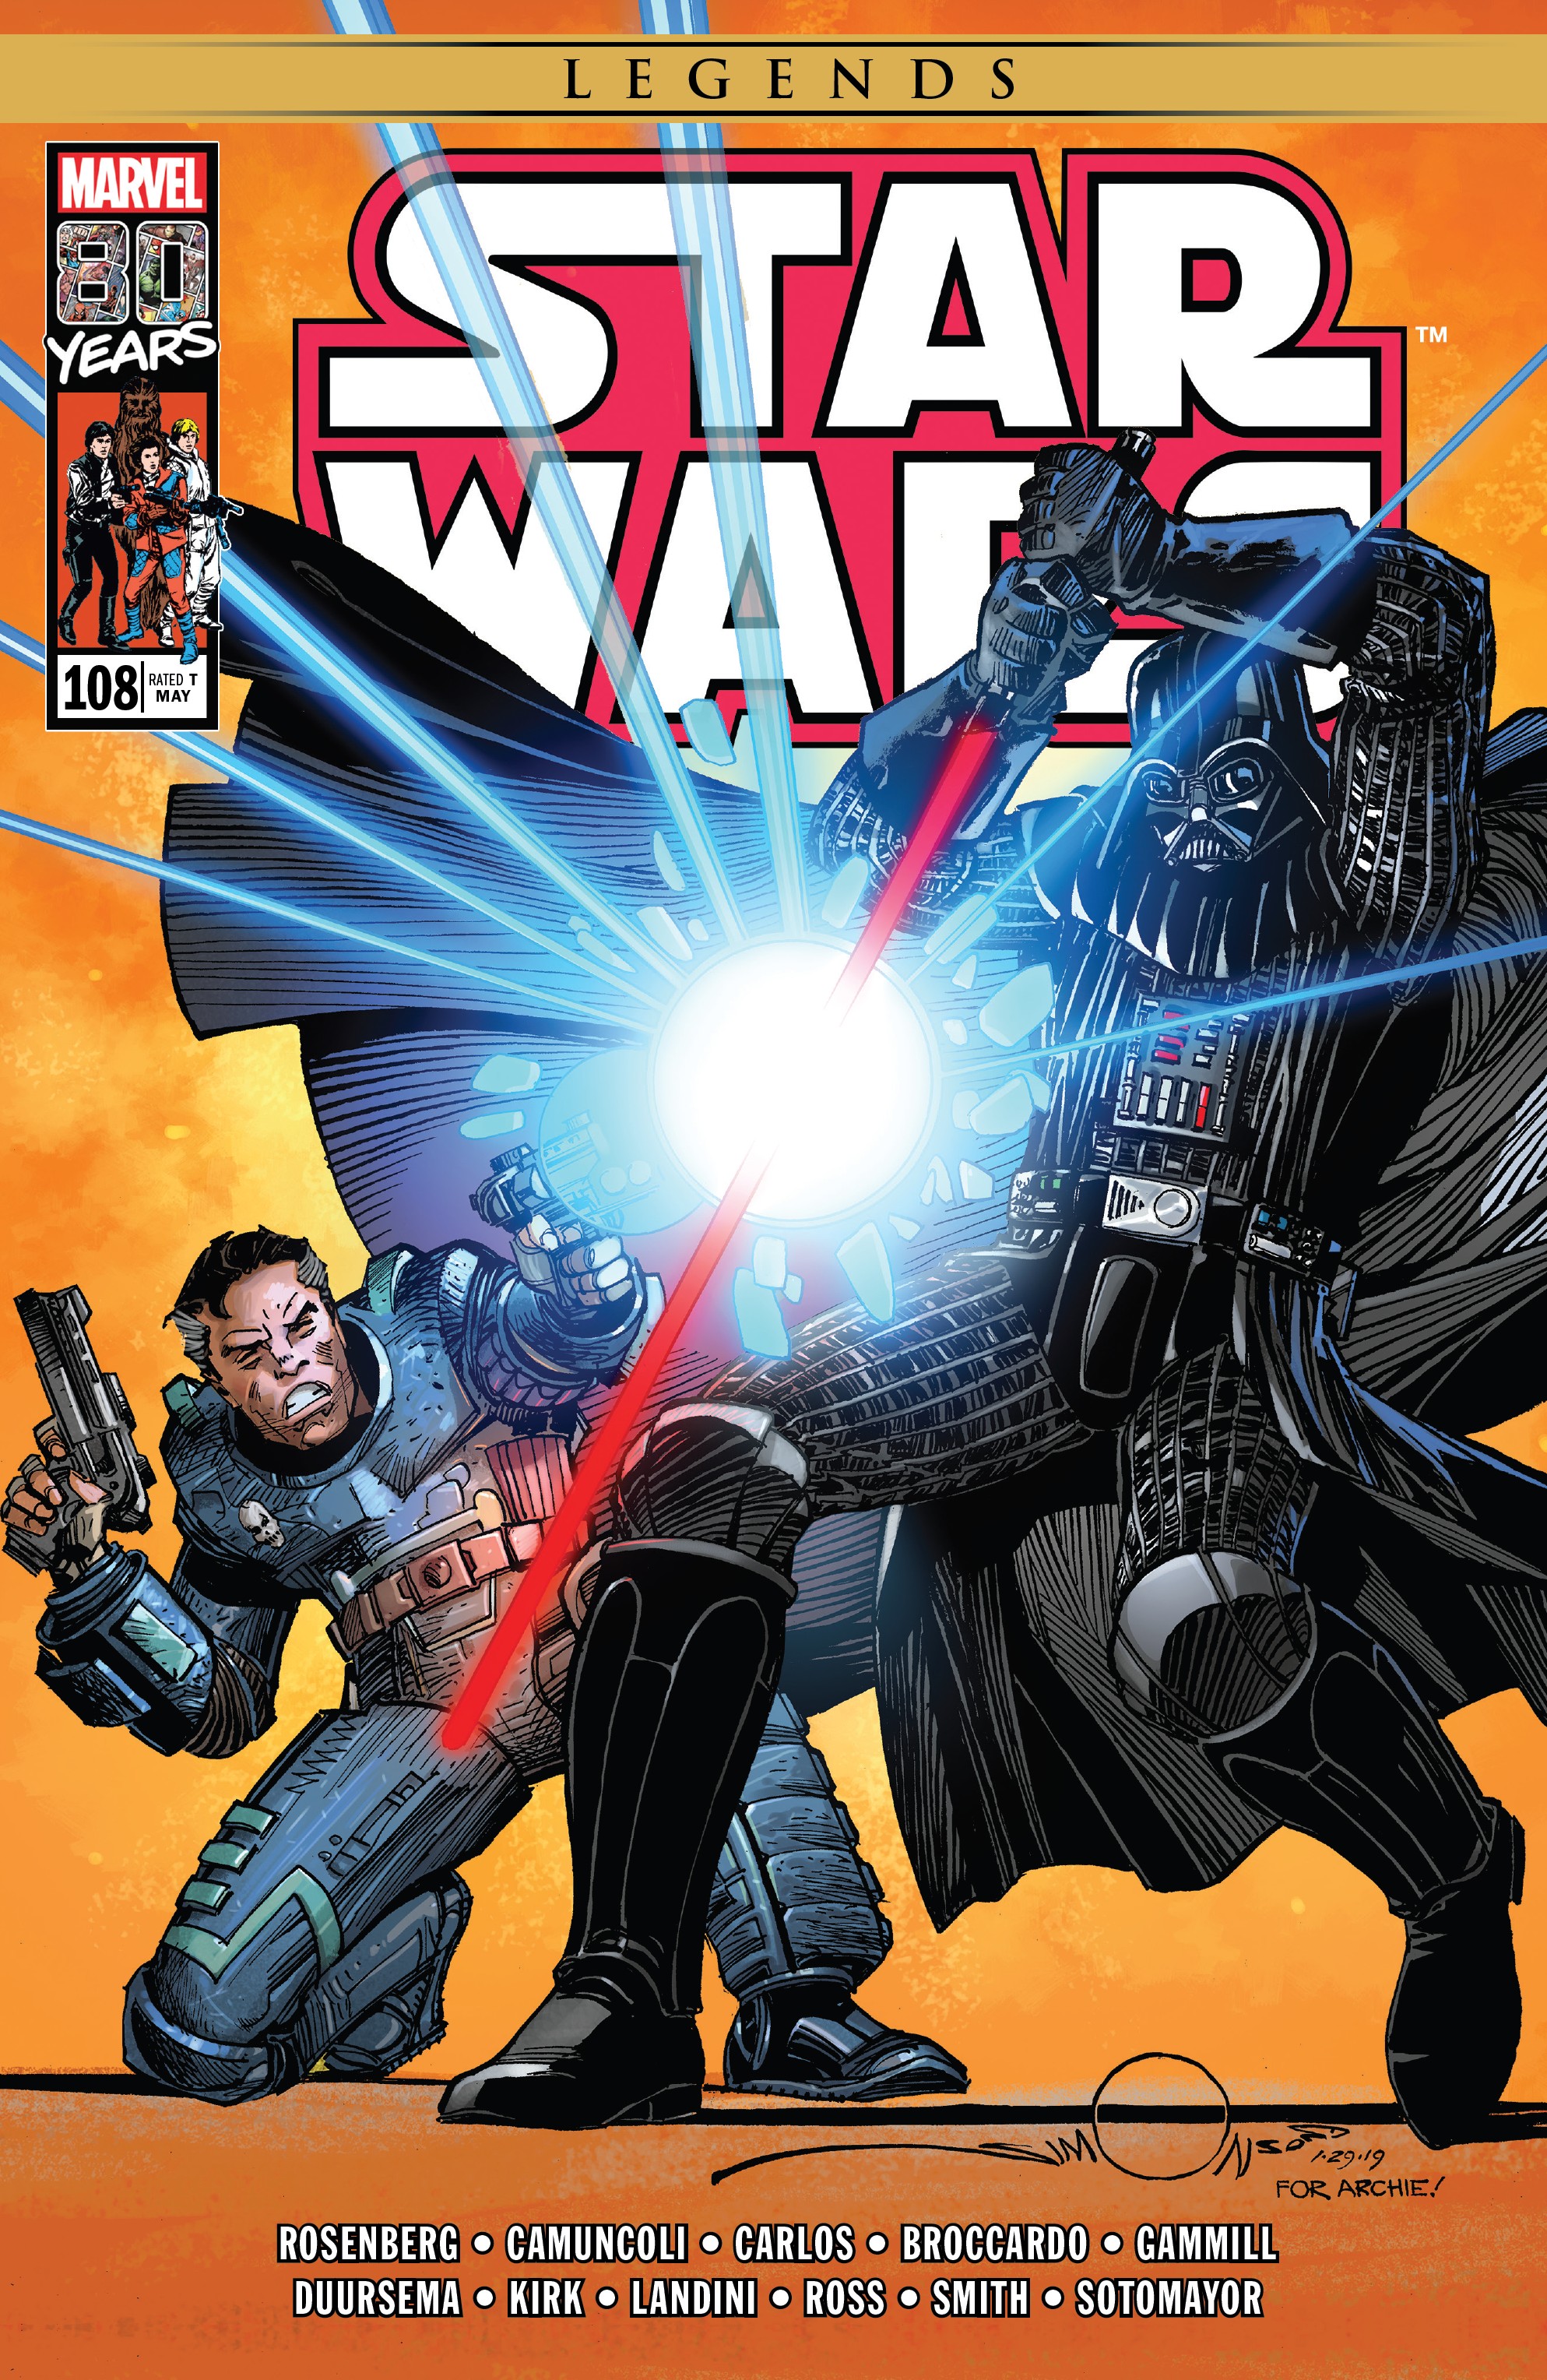 Star Wars #108 review